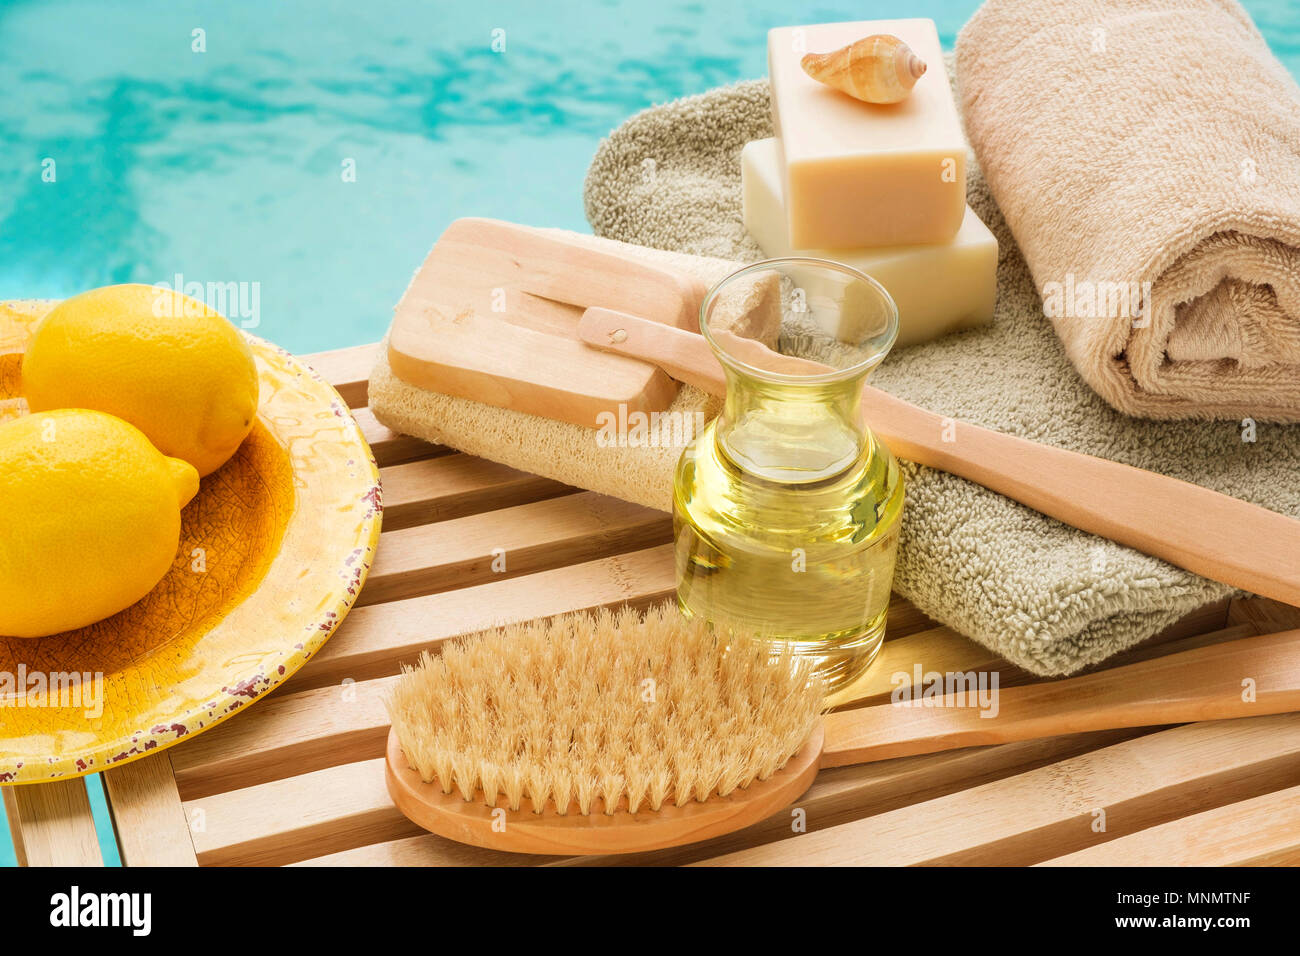 Accessories for spa treatment Stock Photo